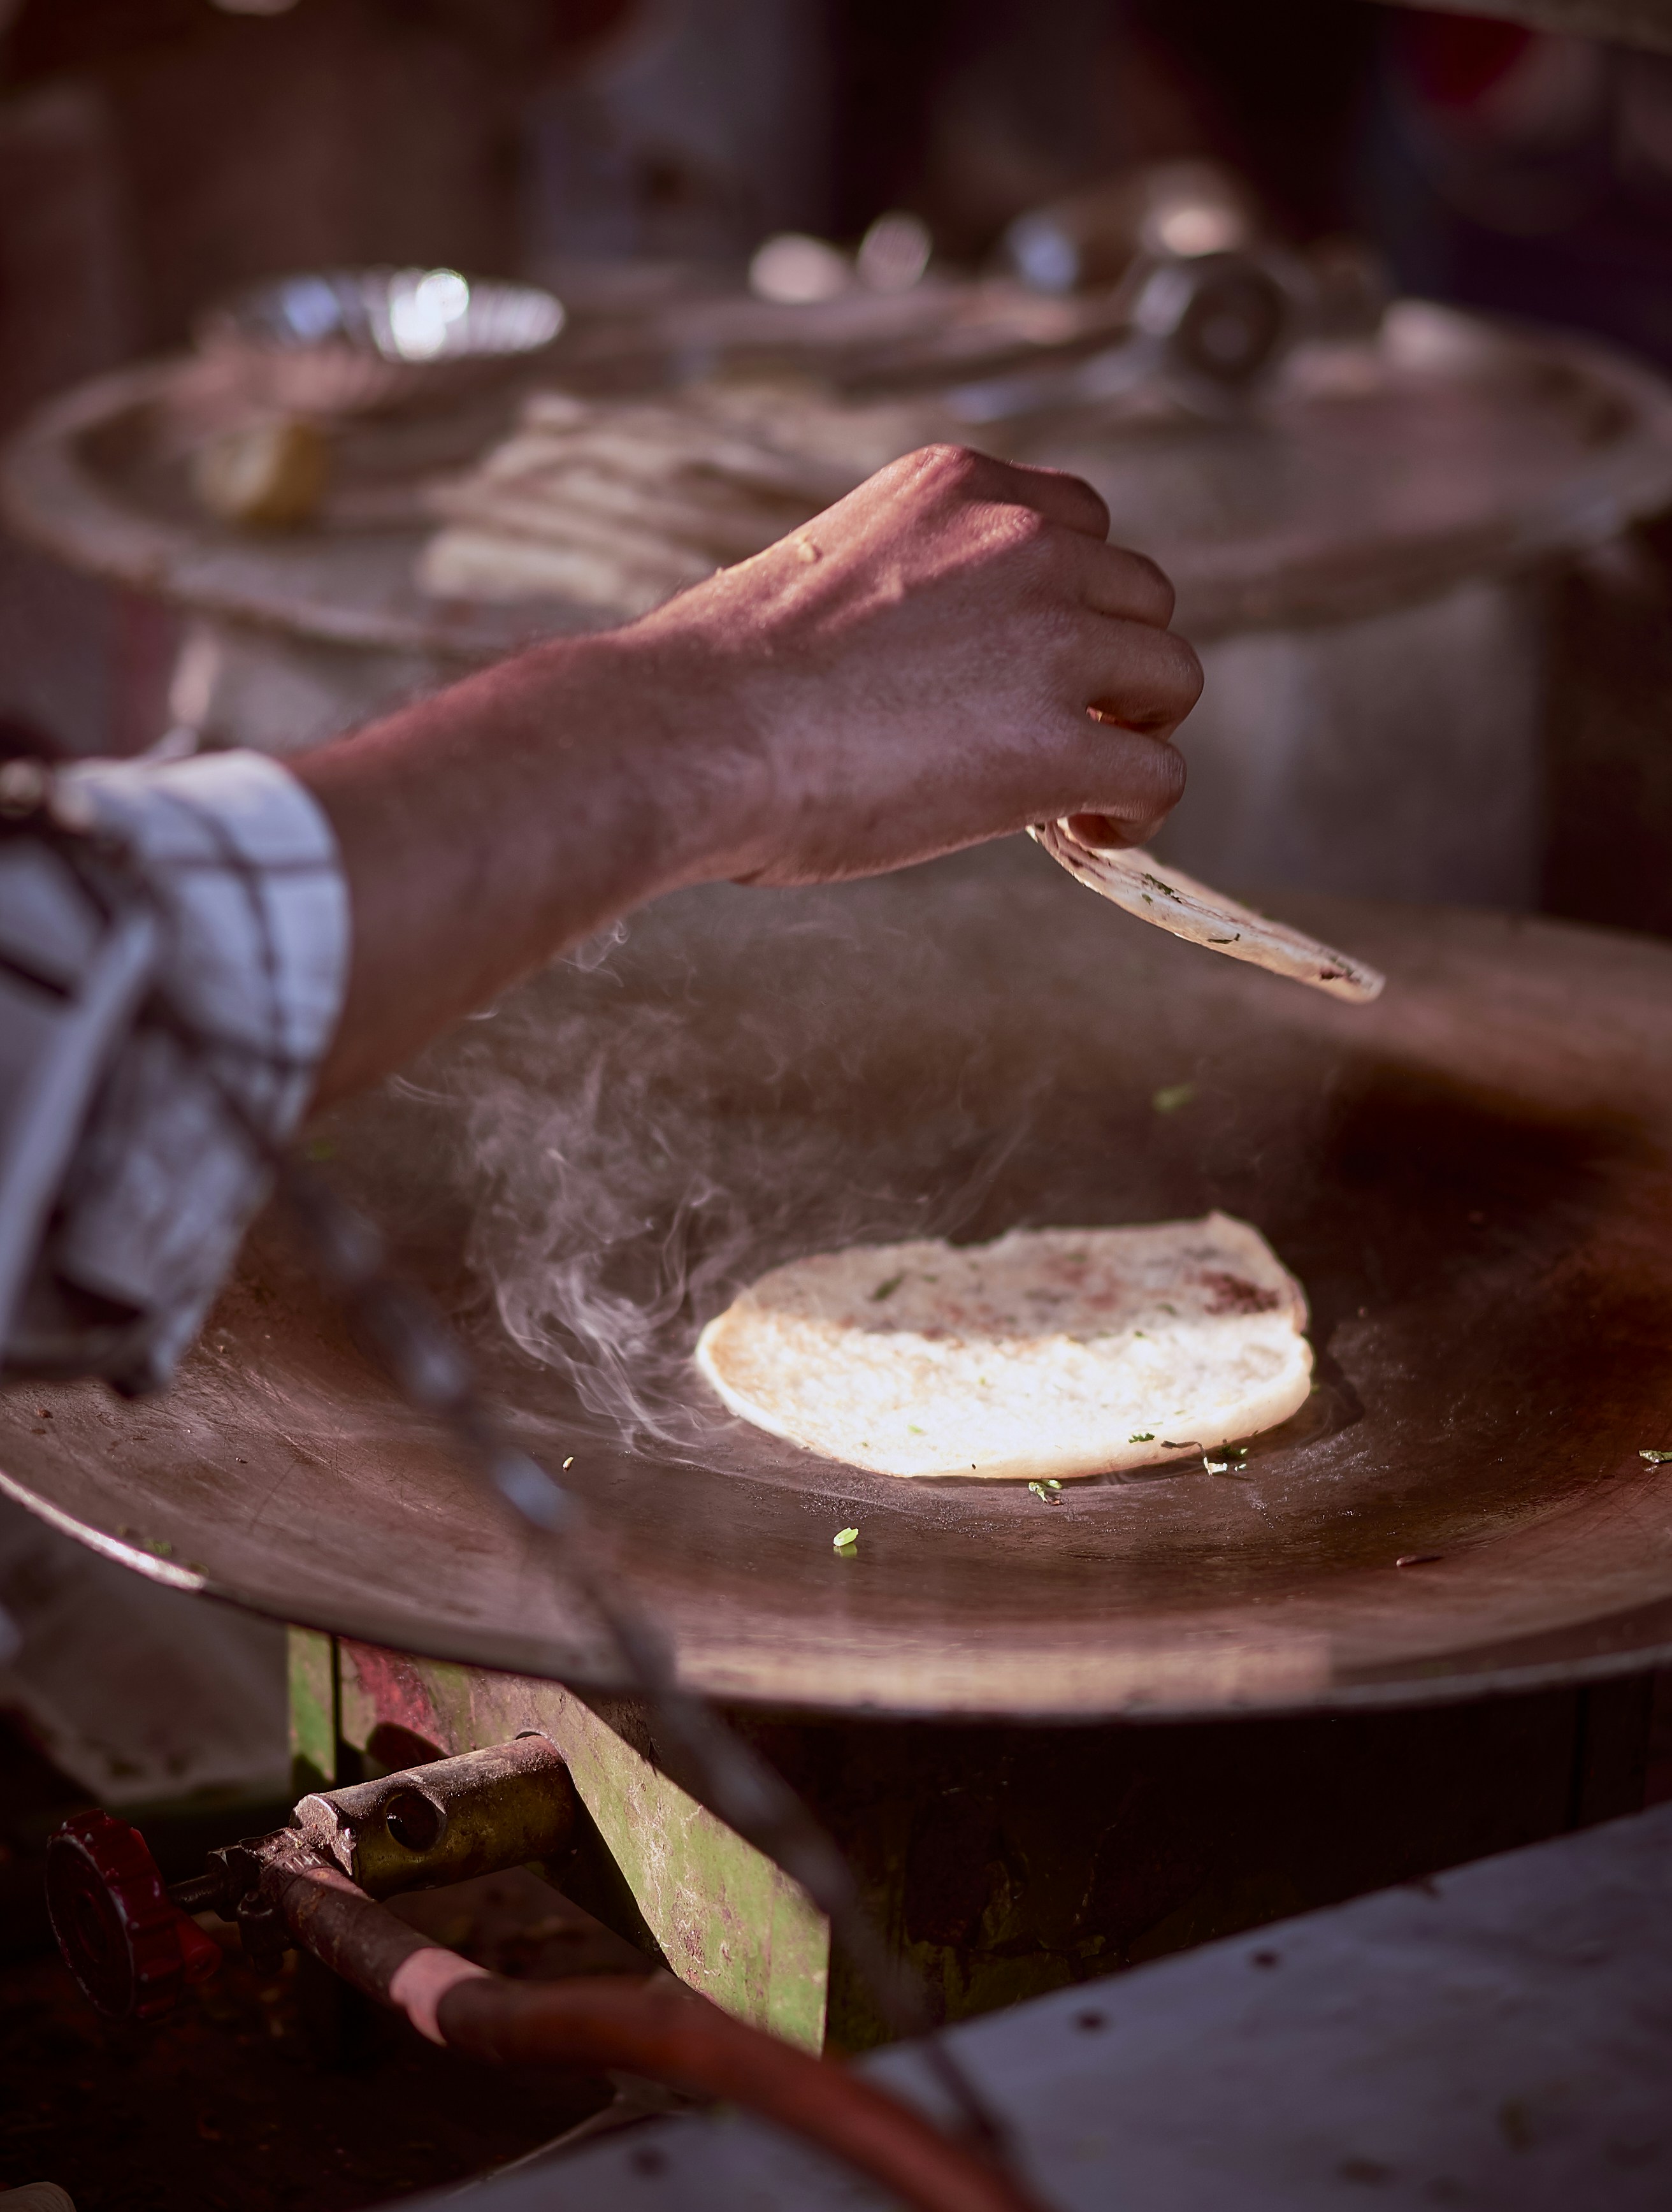 Kulcha being cooked by a roadside food vendor